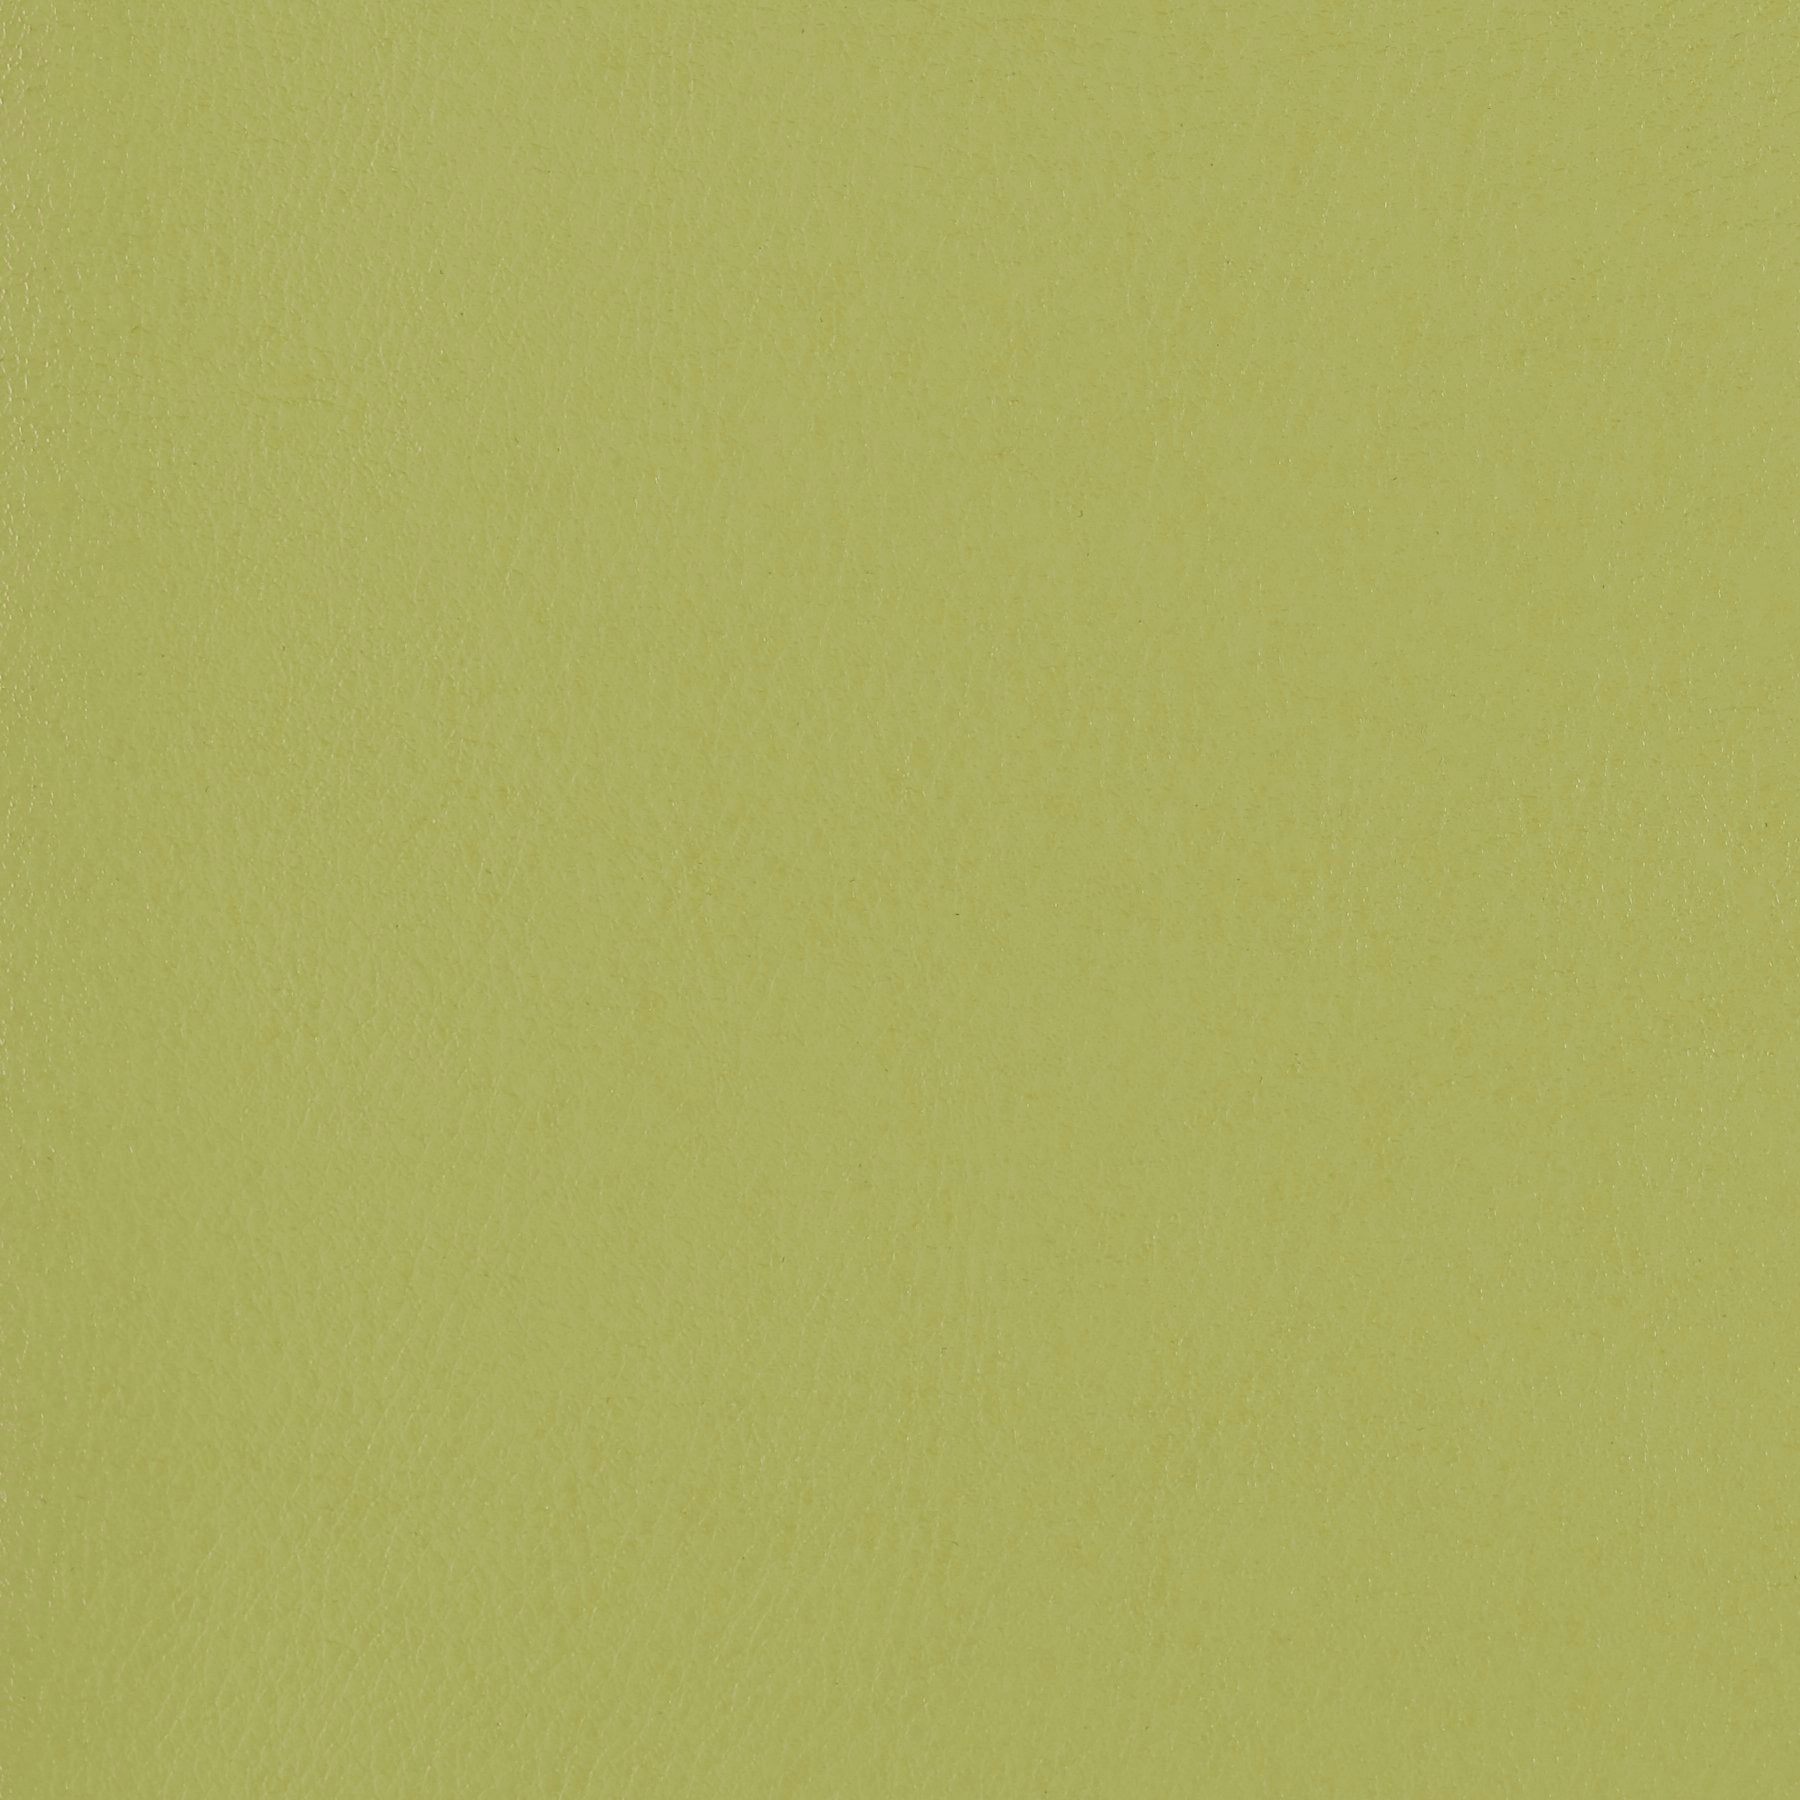 A green background with white lines - Light yellow